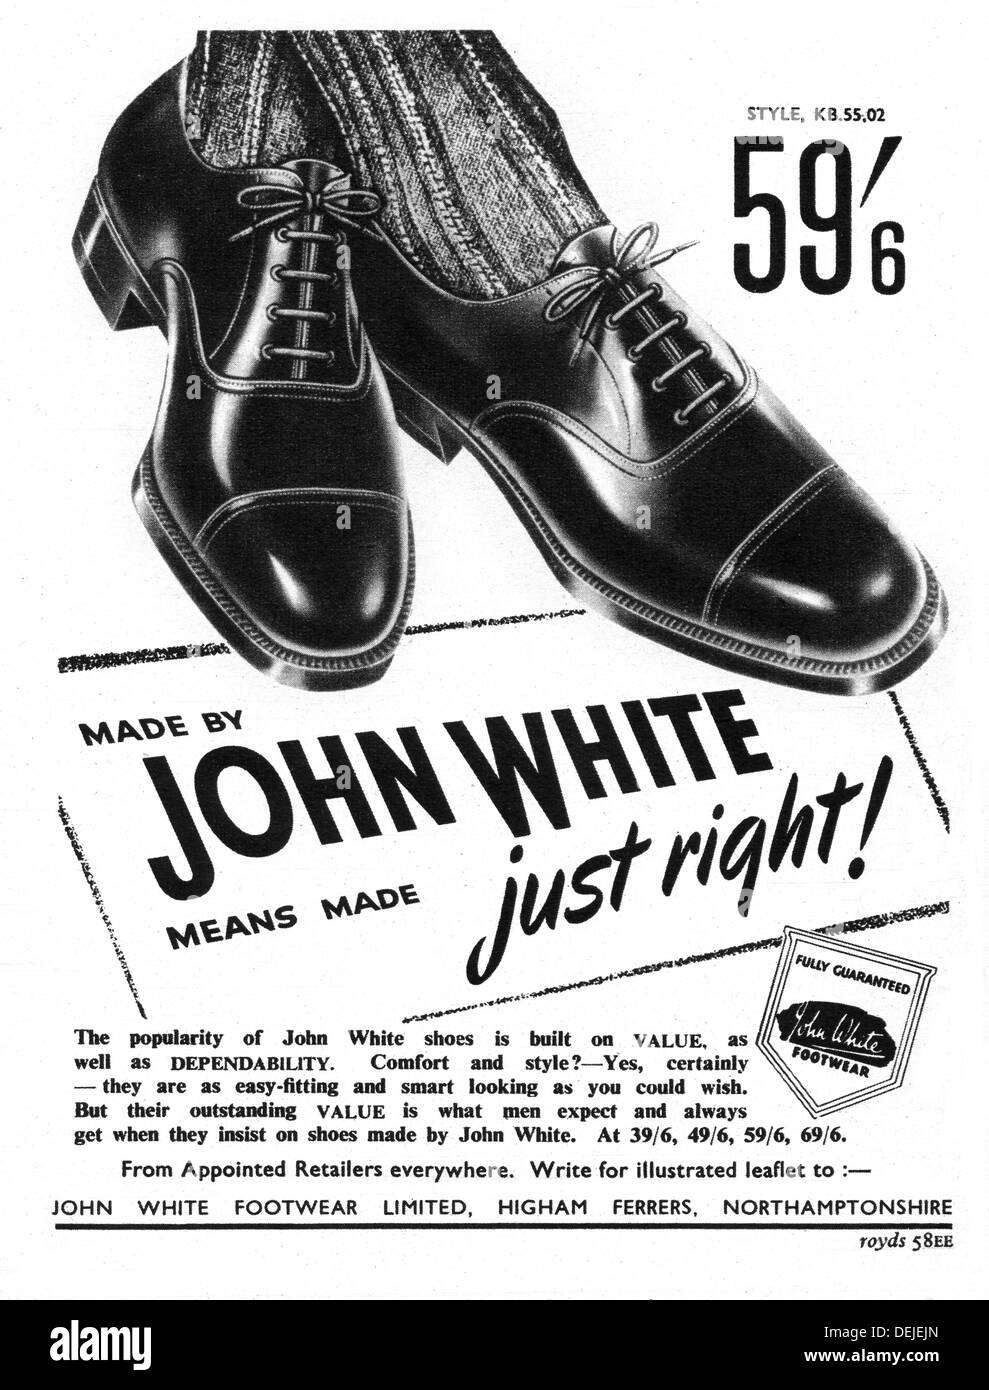 advert for mens shoes in 1952 Stock Photo